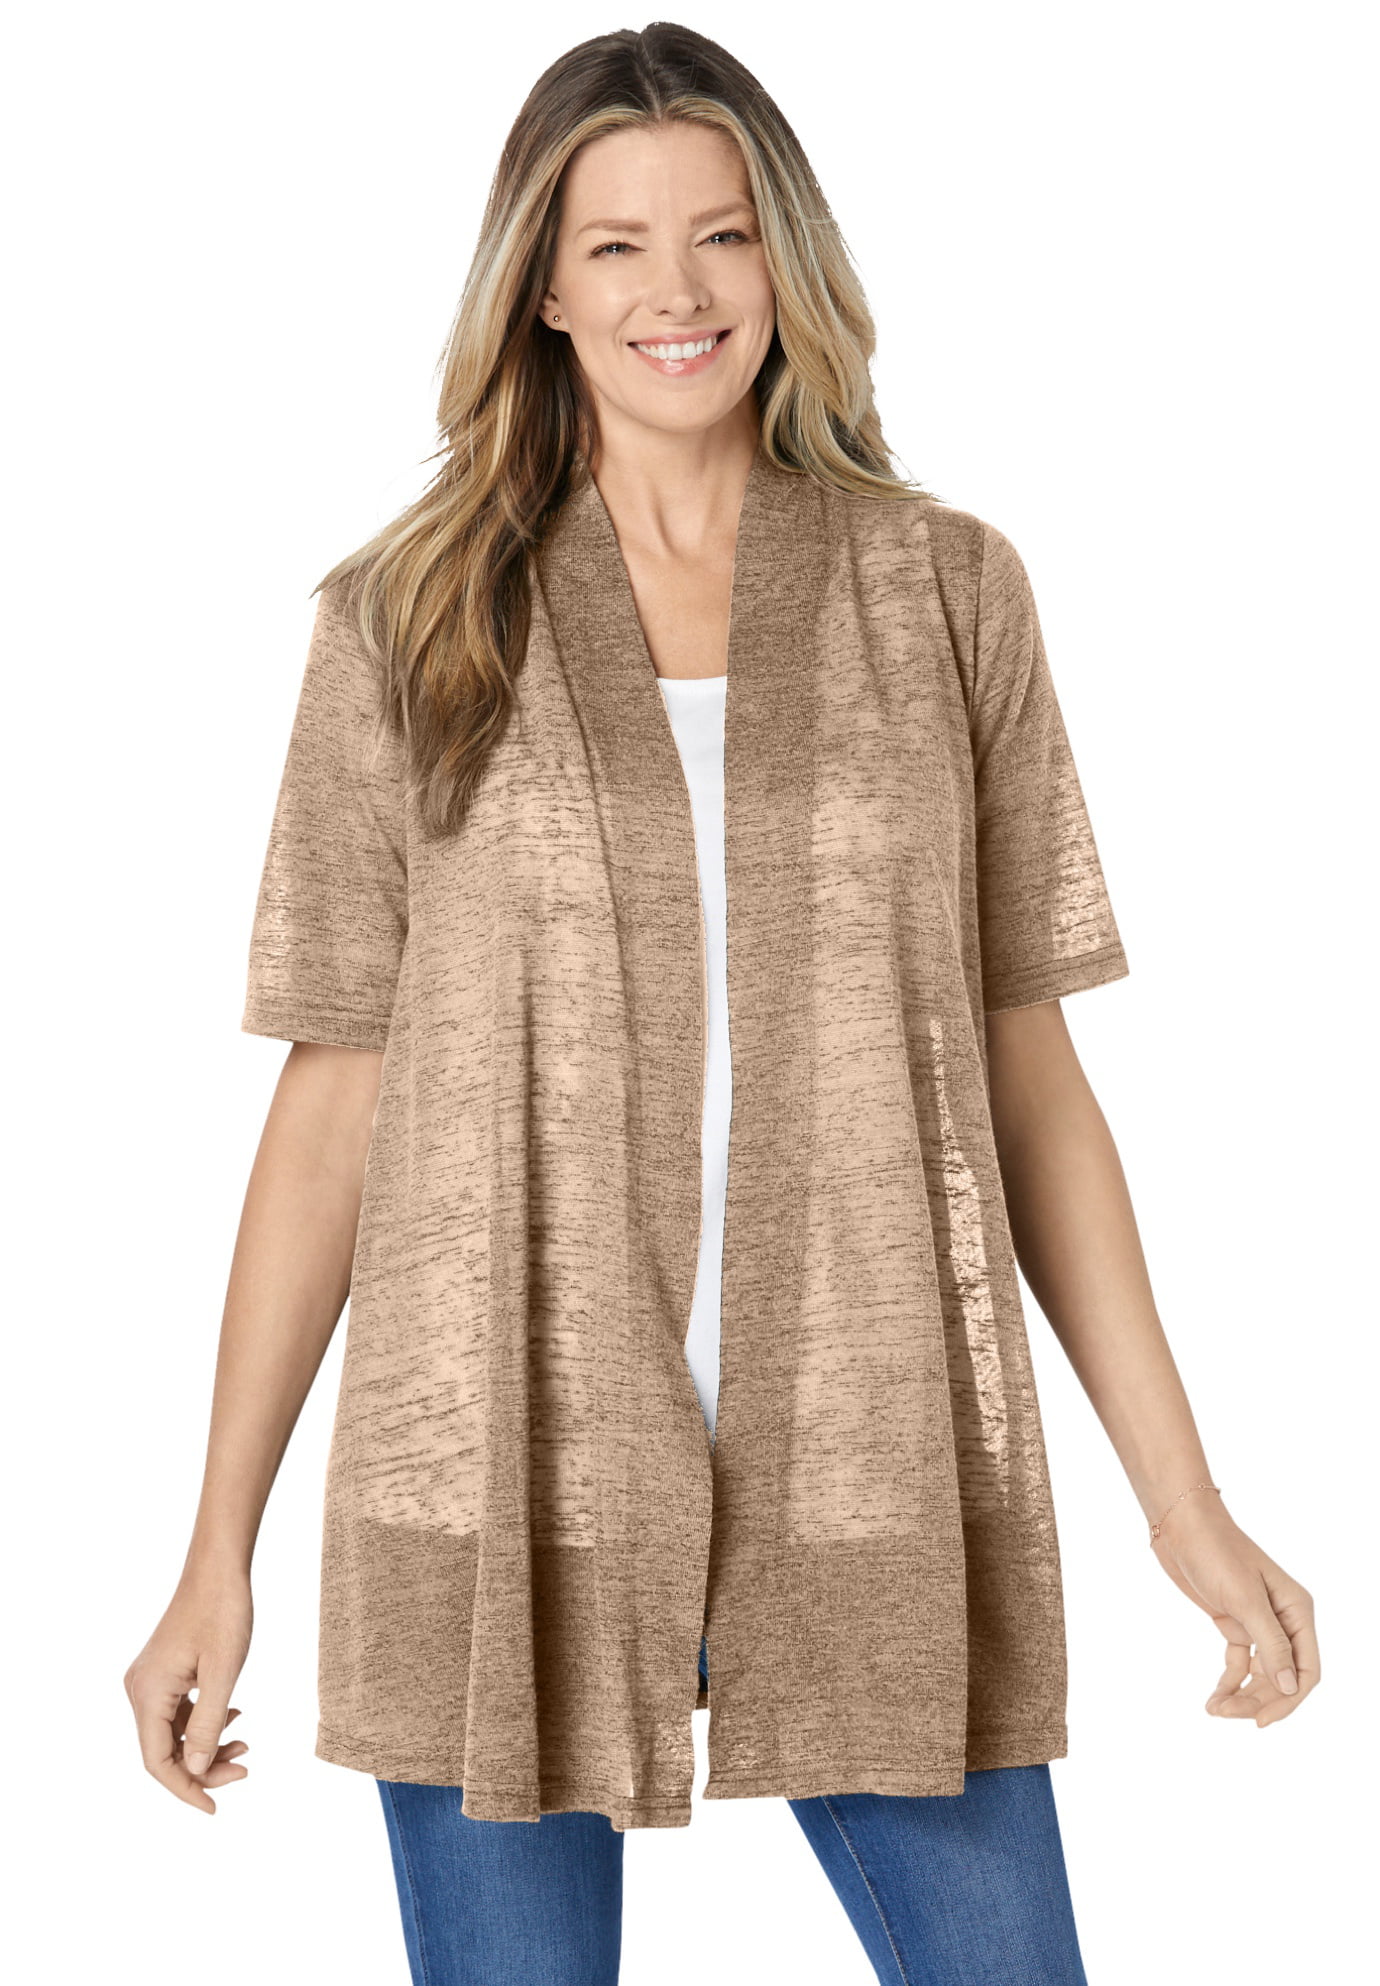 Ladies Short Sleeve Plus Size Open Waterfall Cardigan Womens Stretch Top 12-26 